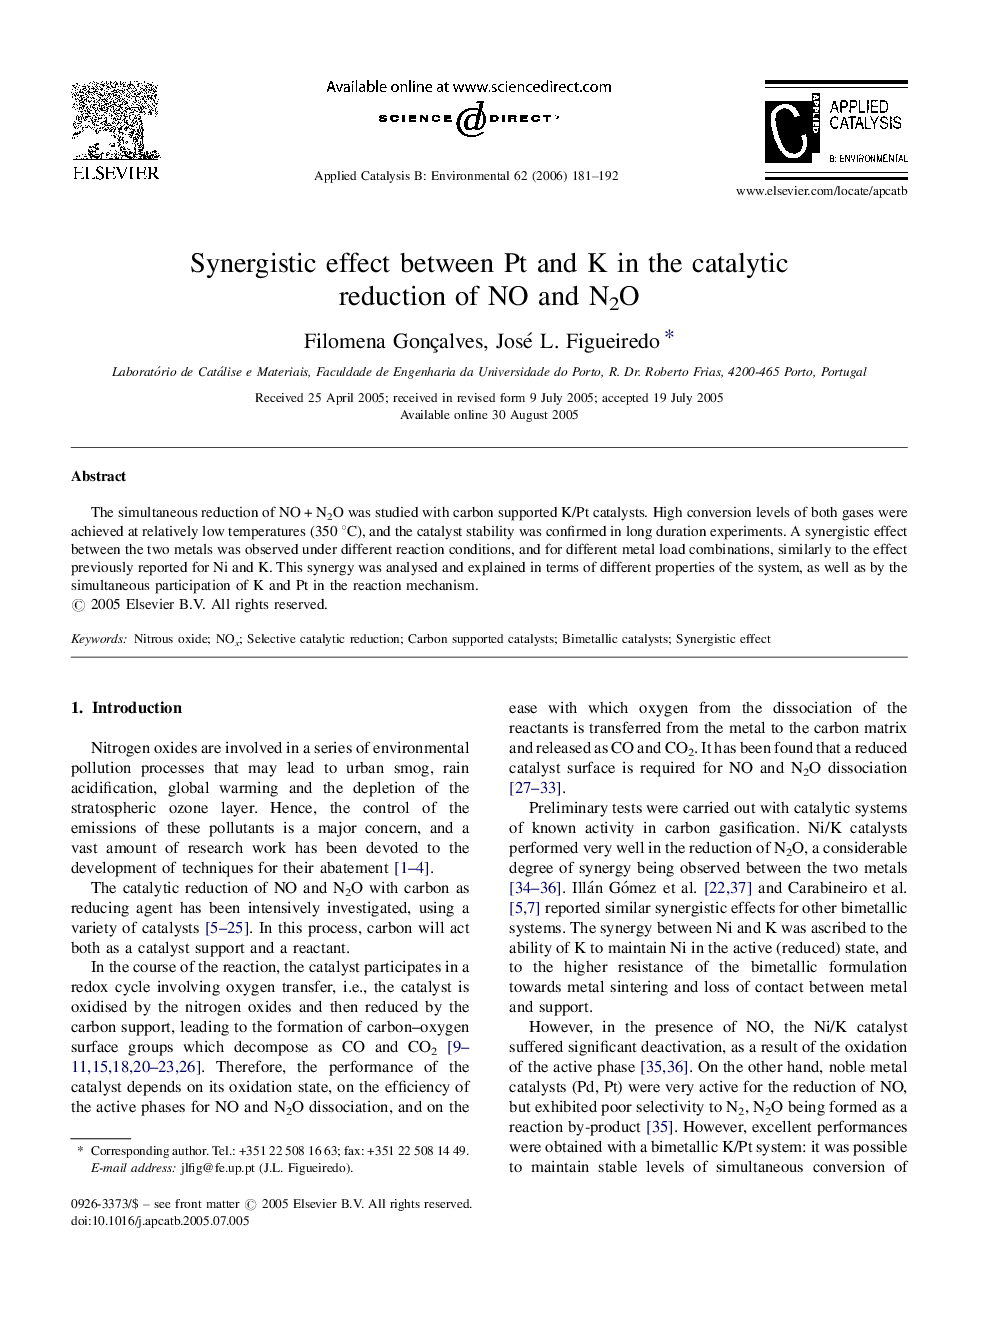 Synergistic effect between Pt and K in the catalytic reduction of NO and N2O